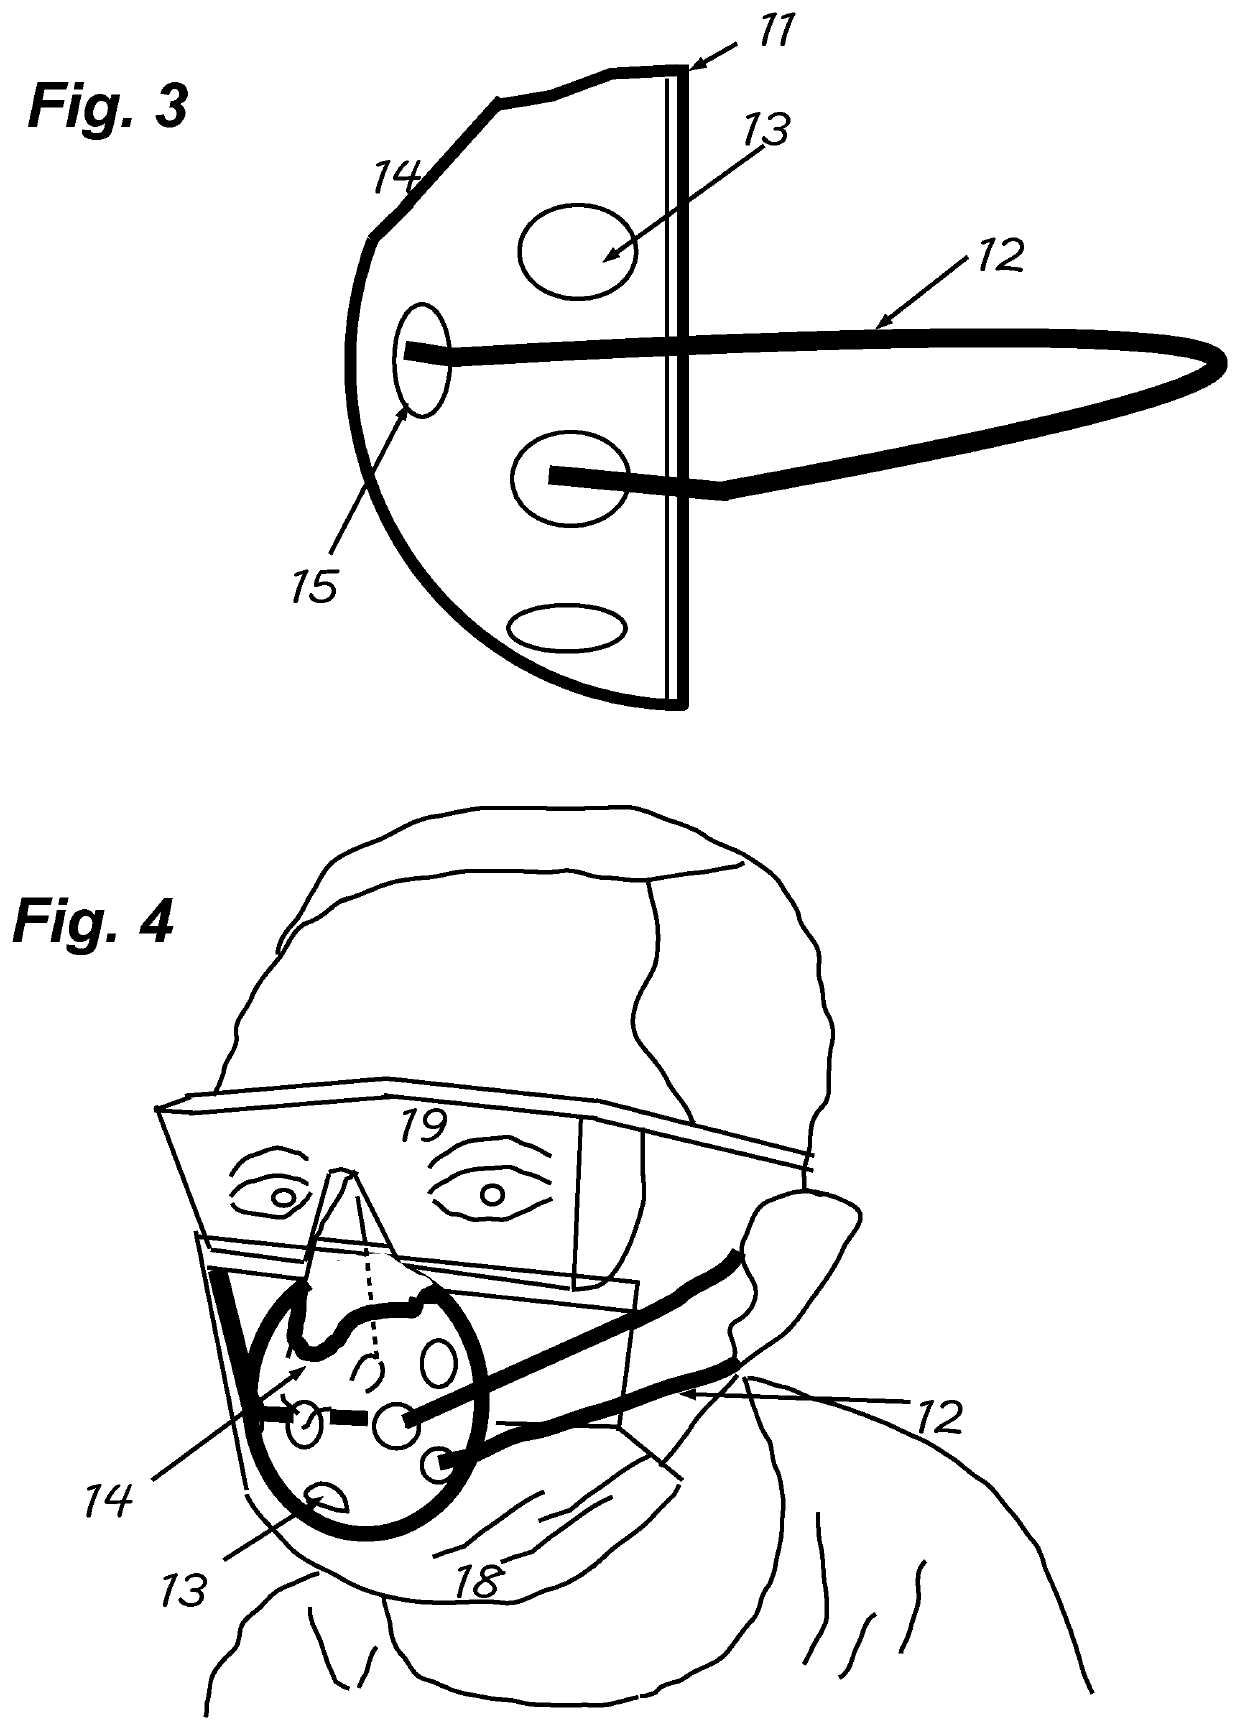 Surgical face mask gripper to improve particulate filtering efficiency